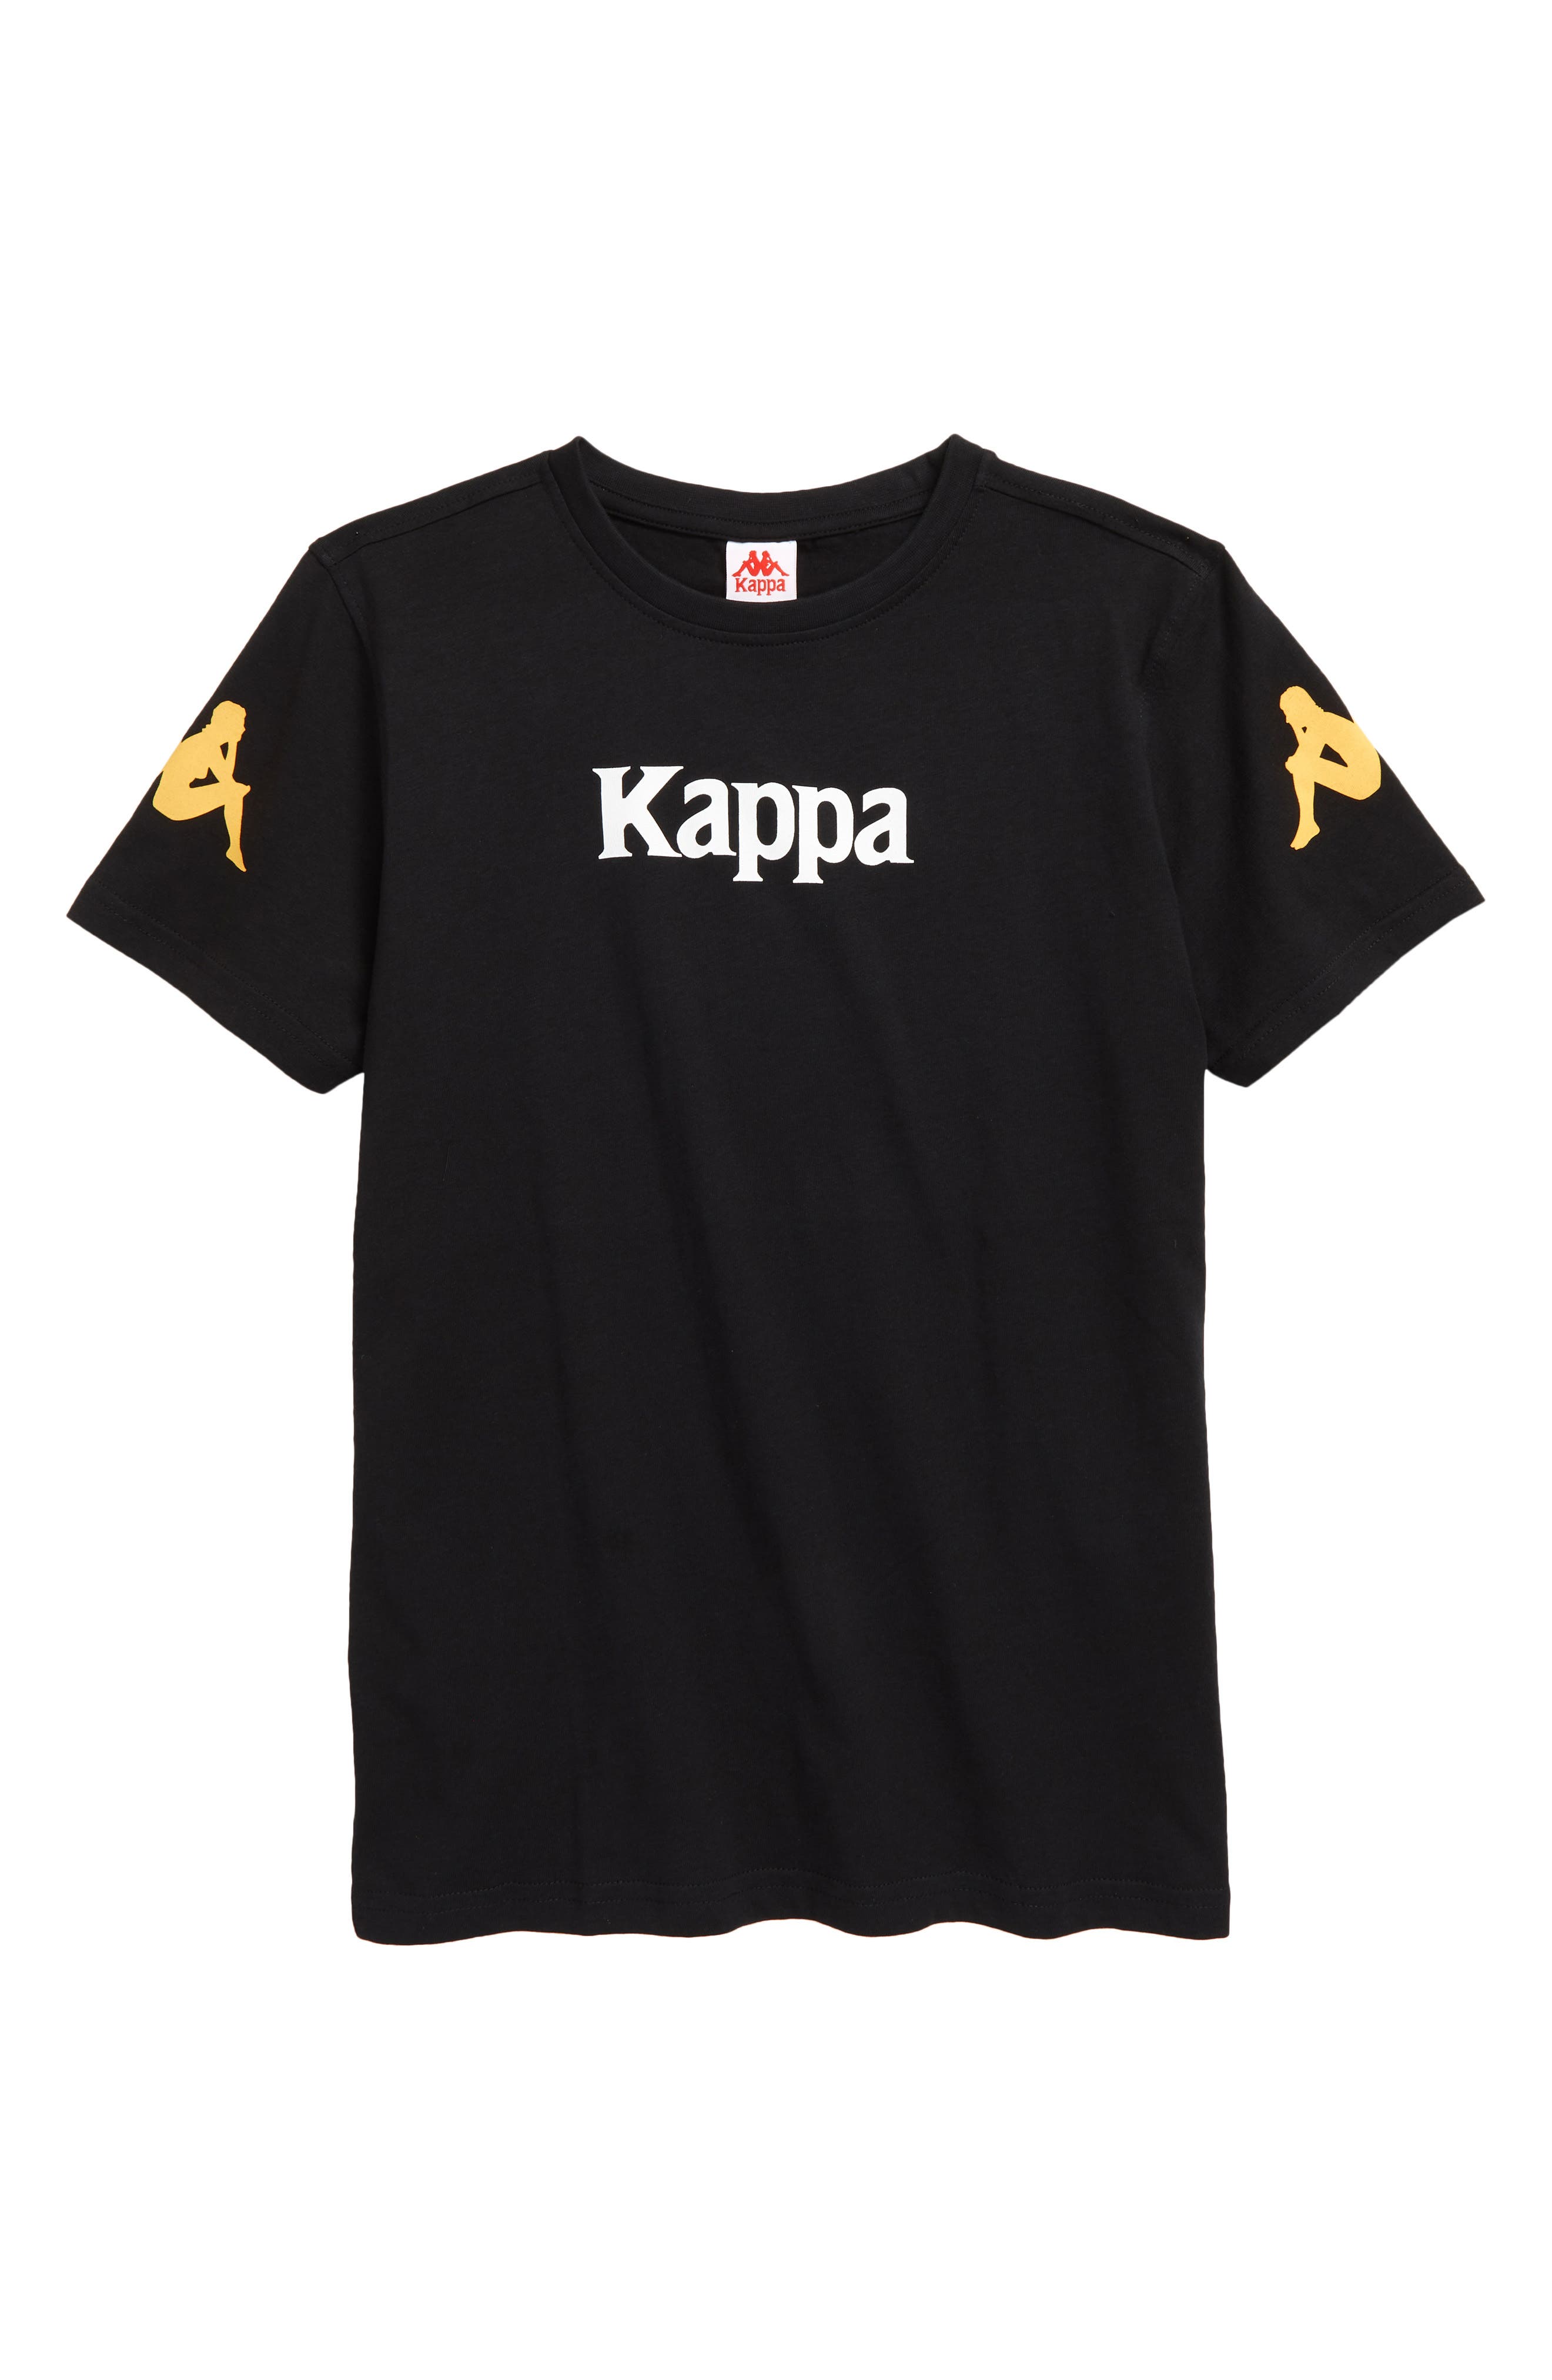 Kappa Kids' Authentic Paroo Logo Graphic Tee in Black Smoke-Yellow-White at Nordstrom, Size 10Y Us